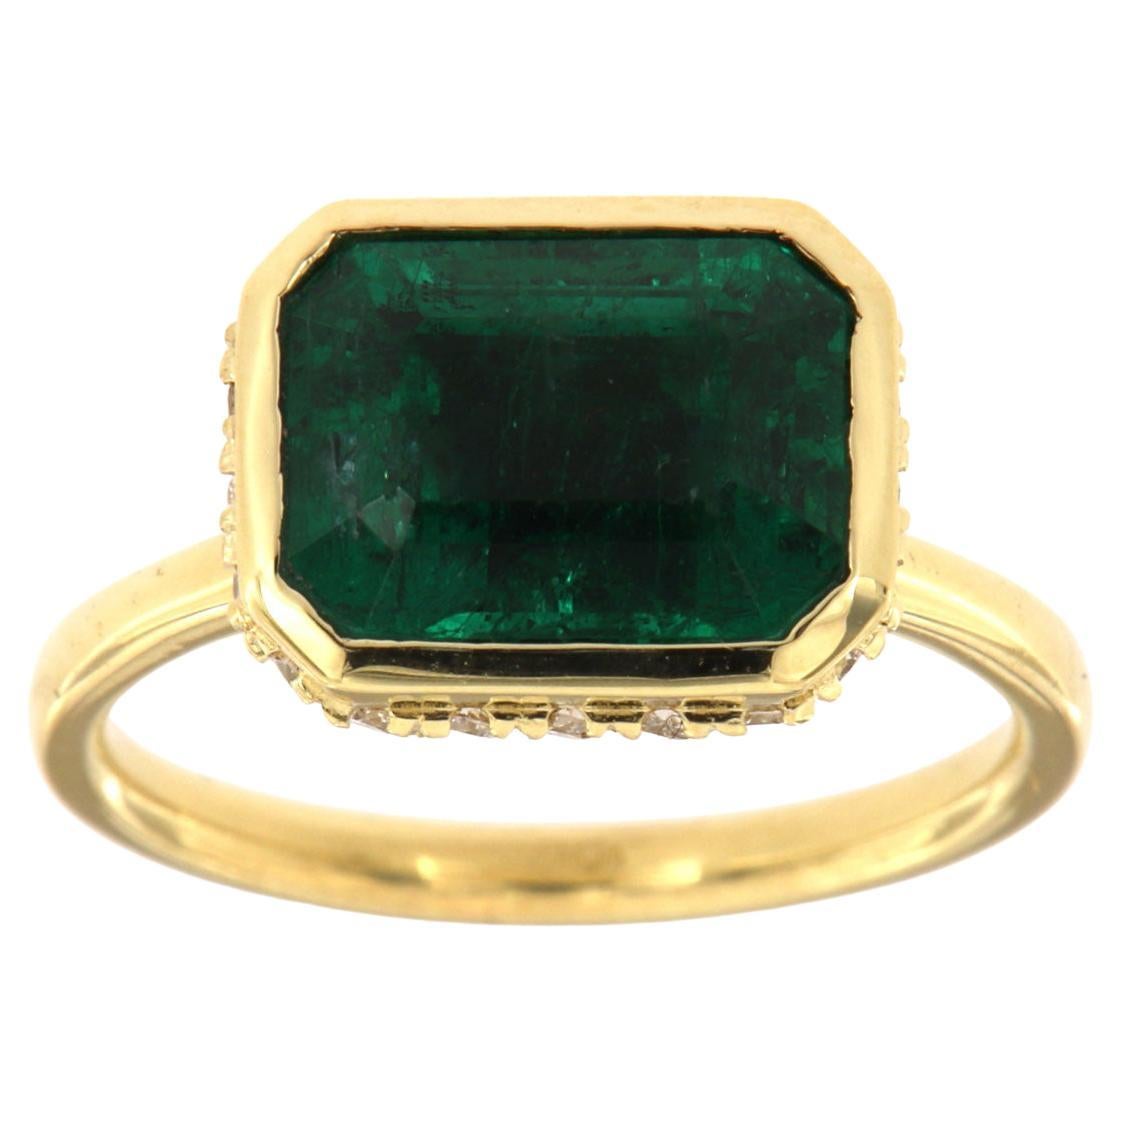 GIA Certified 3.93 Carat Green Emerald Bezel Set in 18K Yellow Gold Diamond Ring For Sale